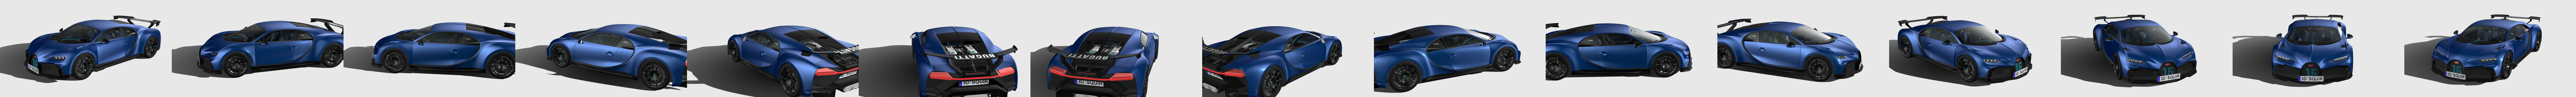 Bugatti Chiron Pur Sport 2021 - Buy Royalty Free 3D model by SQUIR3D  (@SQUIR3D) [dbba698]